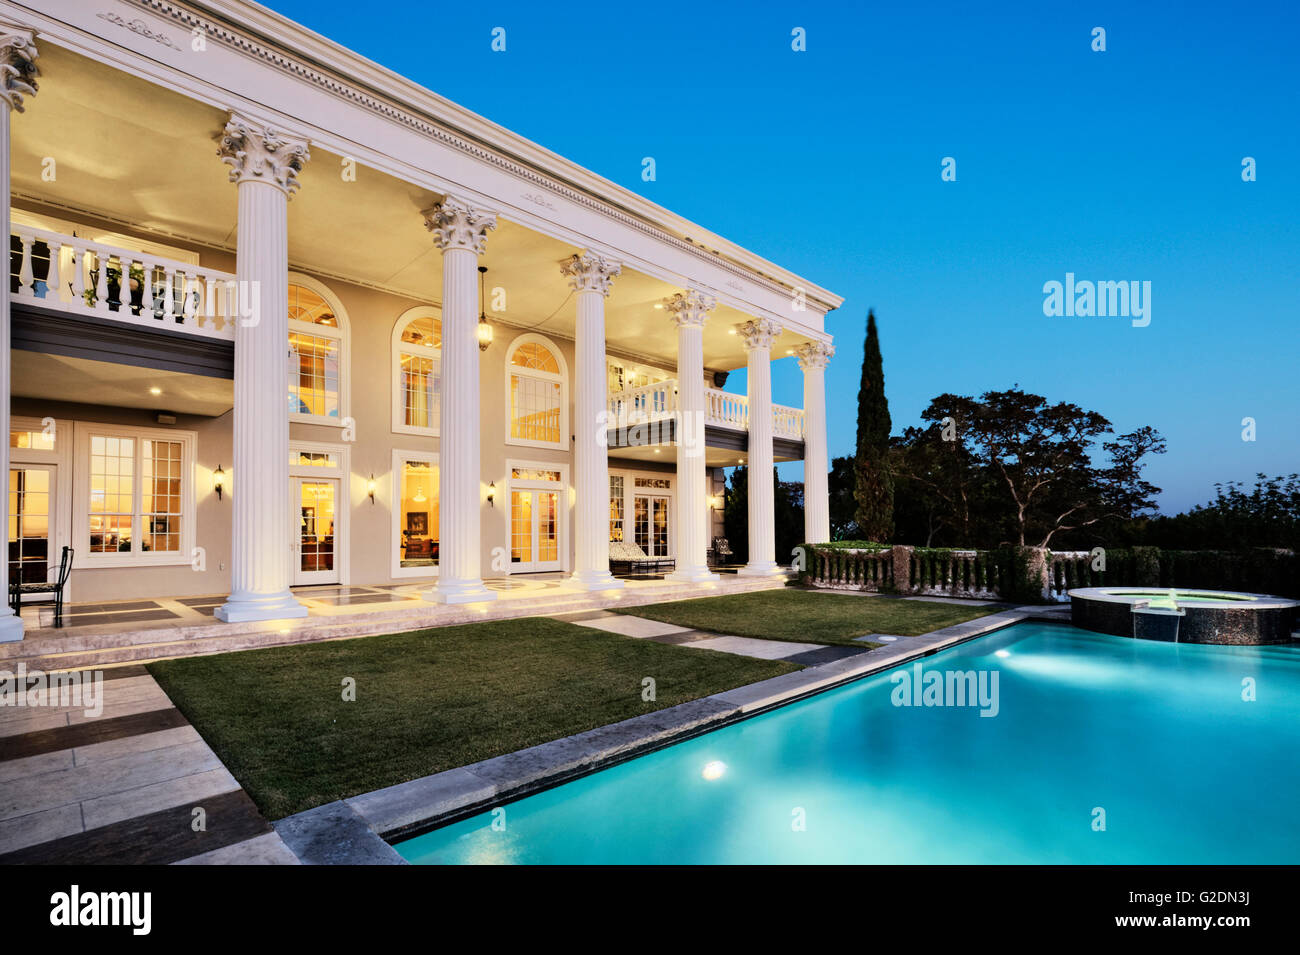 Mansion with Columns and Swimming Pool at Dusk Stock Photo